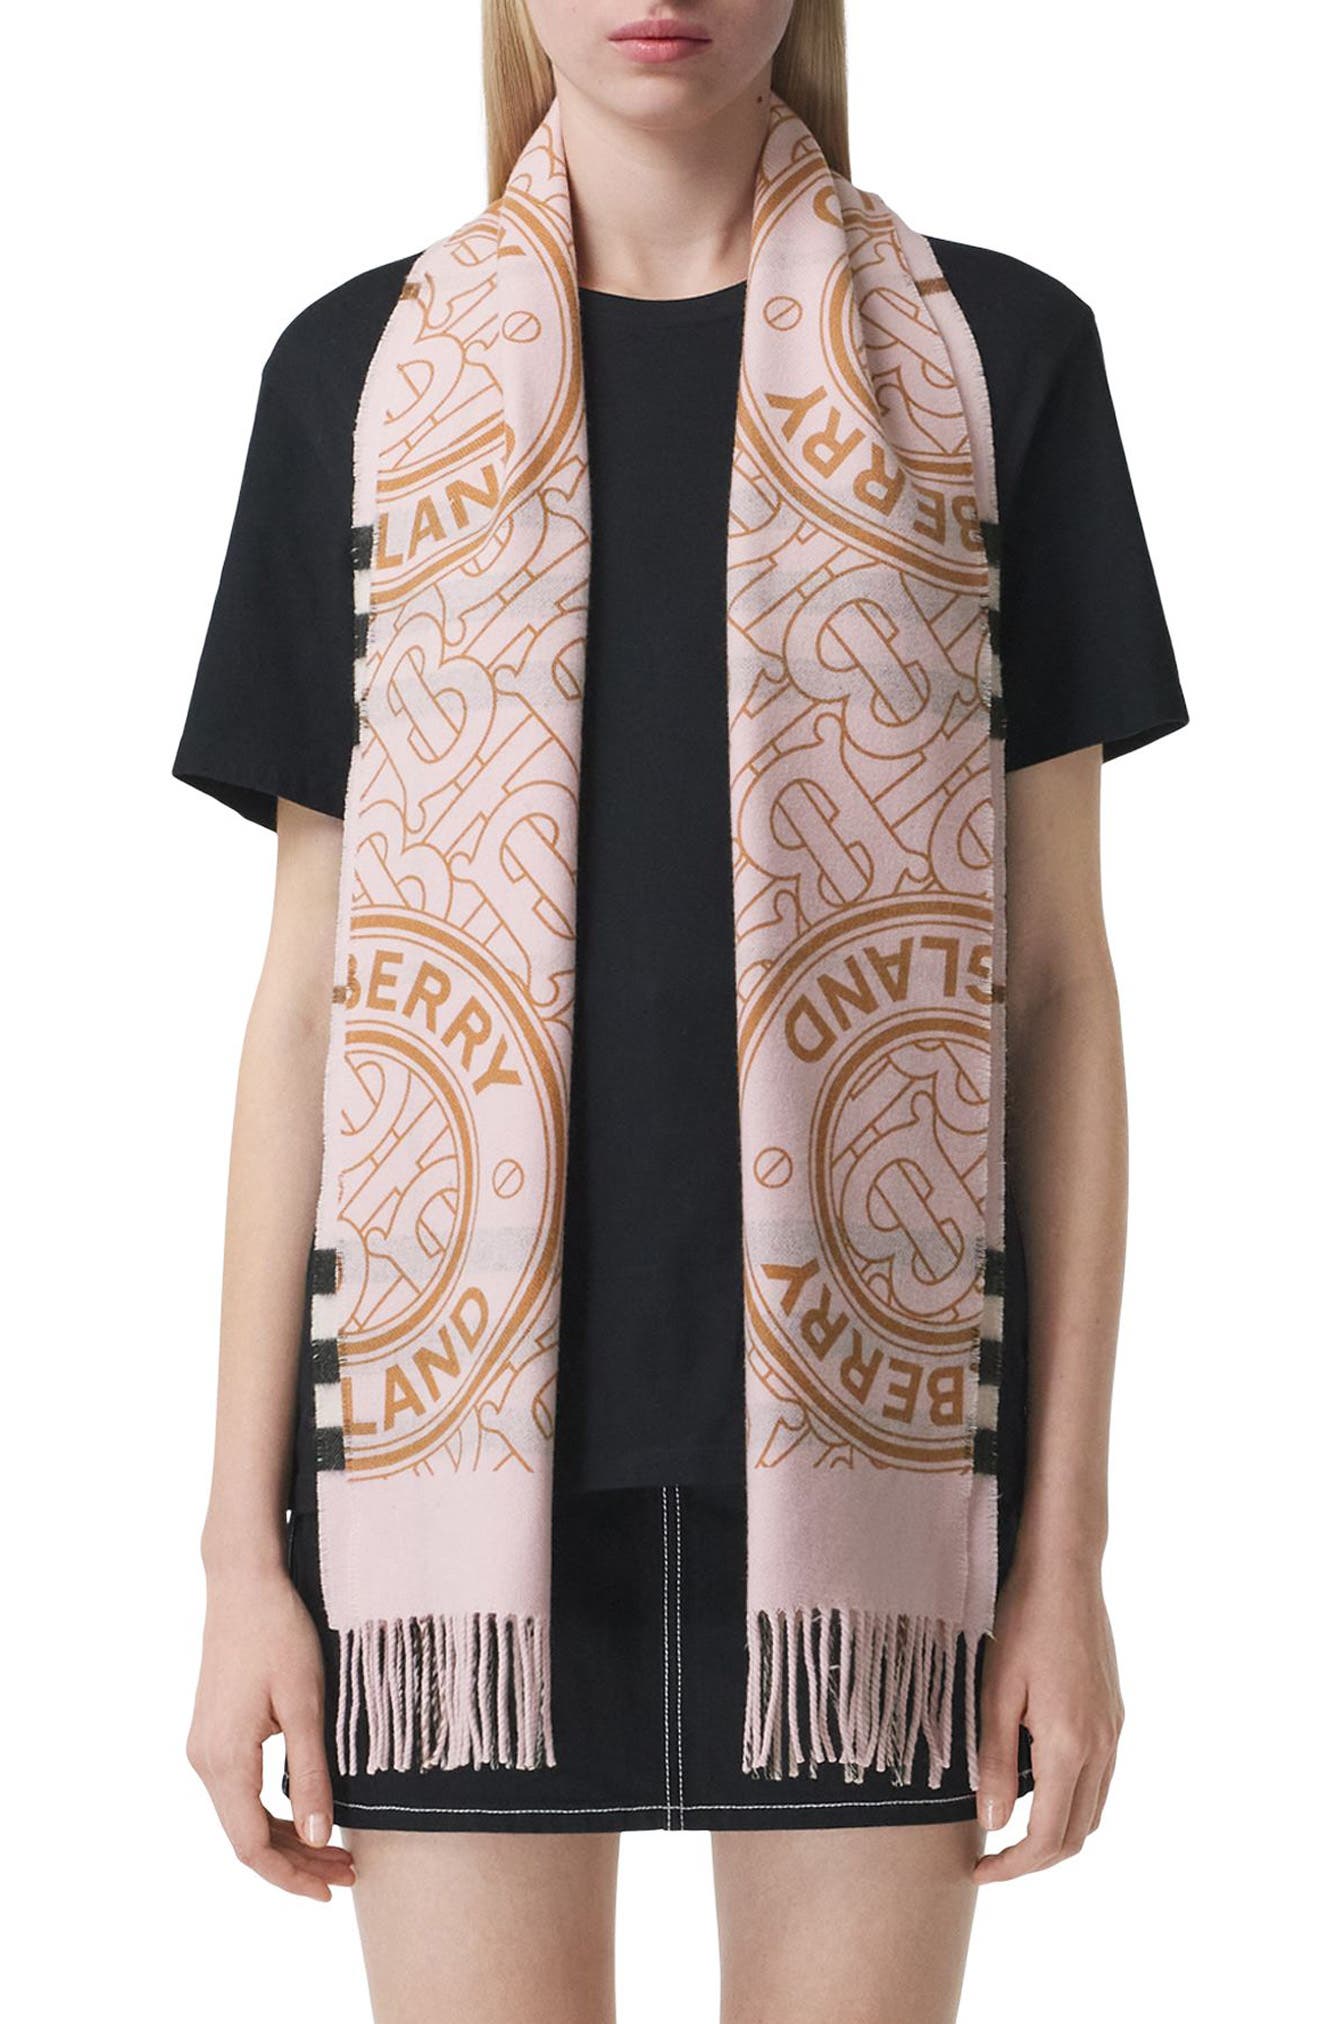 Burberry TB Monogram Check Cashmere Scarf in Pale Pink at Nordstrom